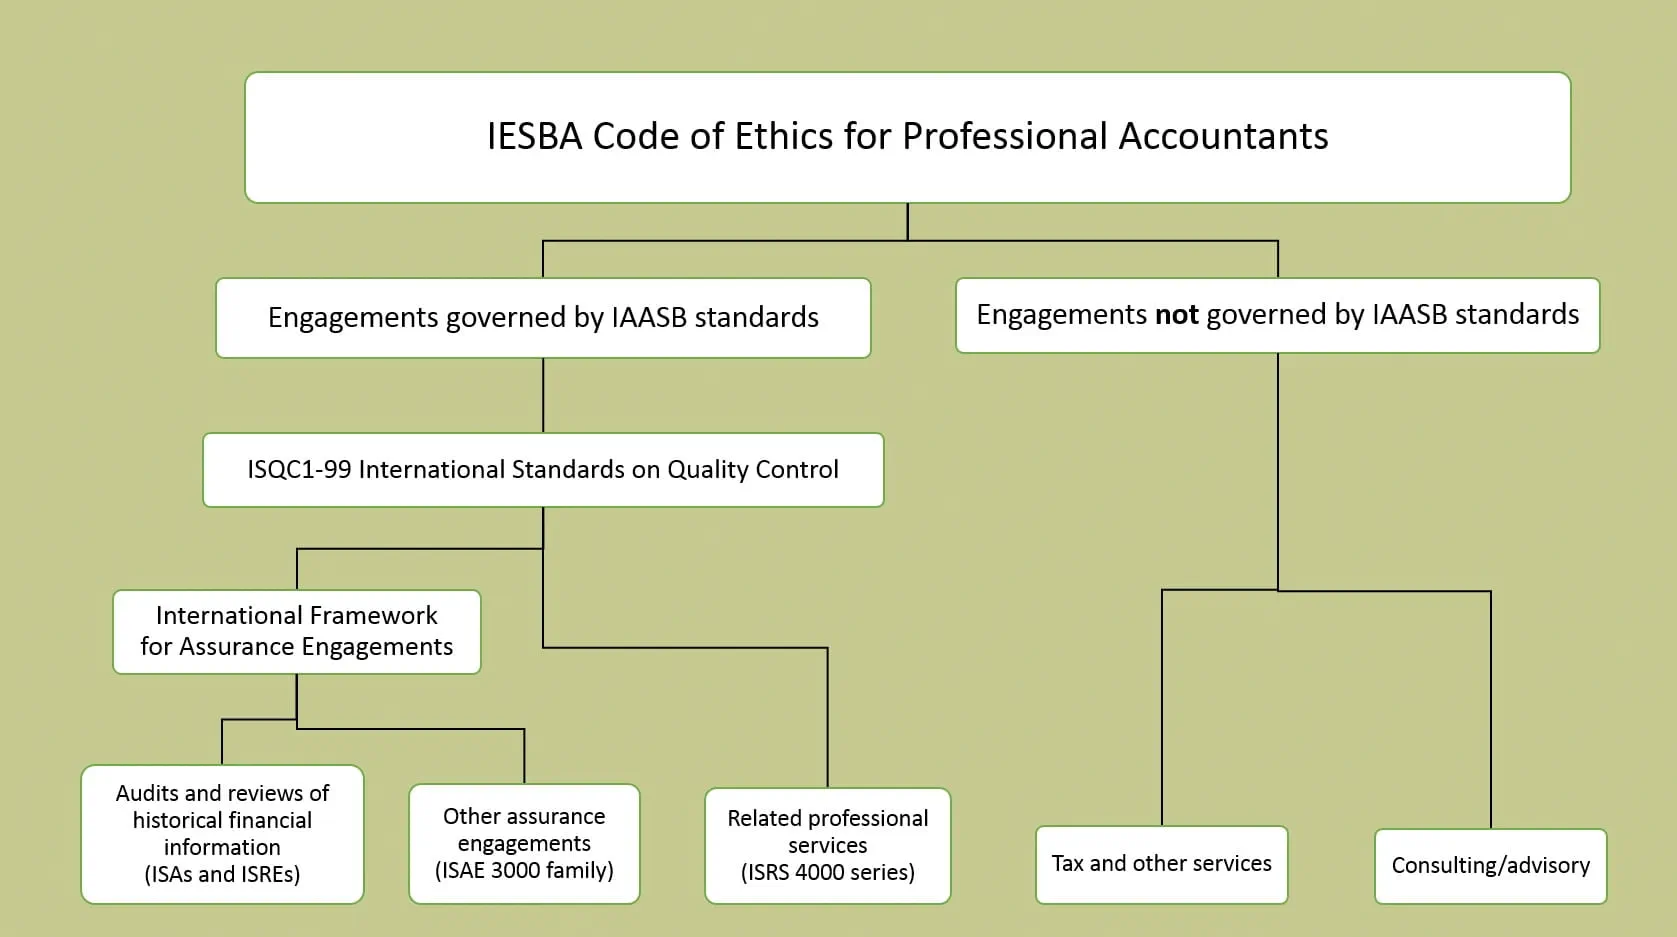 A graphic illustrating where the International Framework for Assurance Engagements sits within the various IAASB and related Codes and Standards.